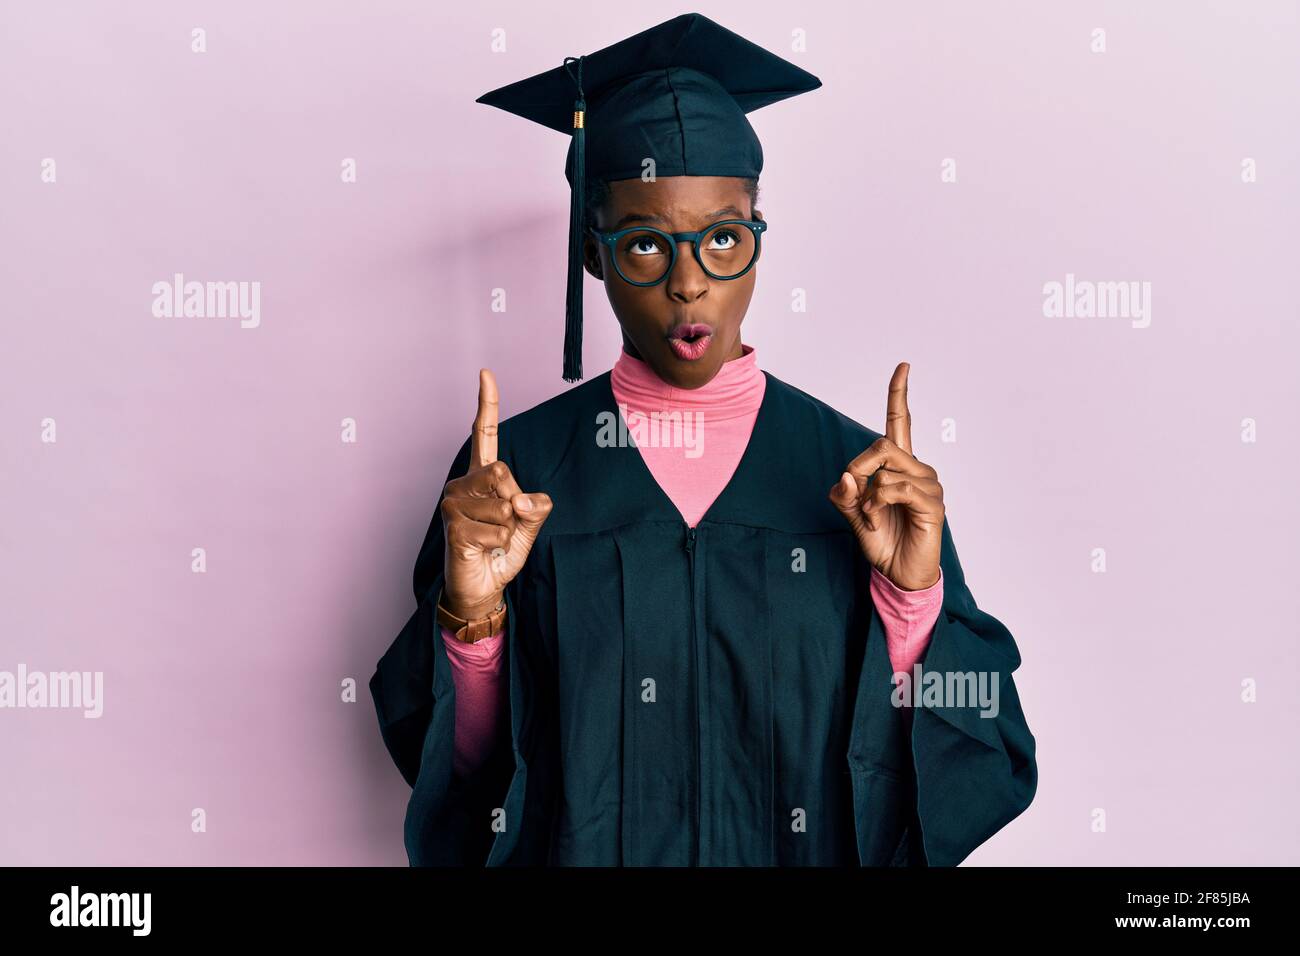 Young african american girl wearing graduation cap and ceremony robe amazed and surprised looking up and pointing with fingers and raised arms. Stock Photo